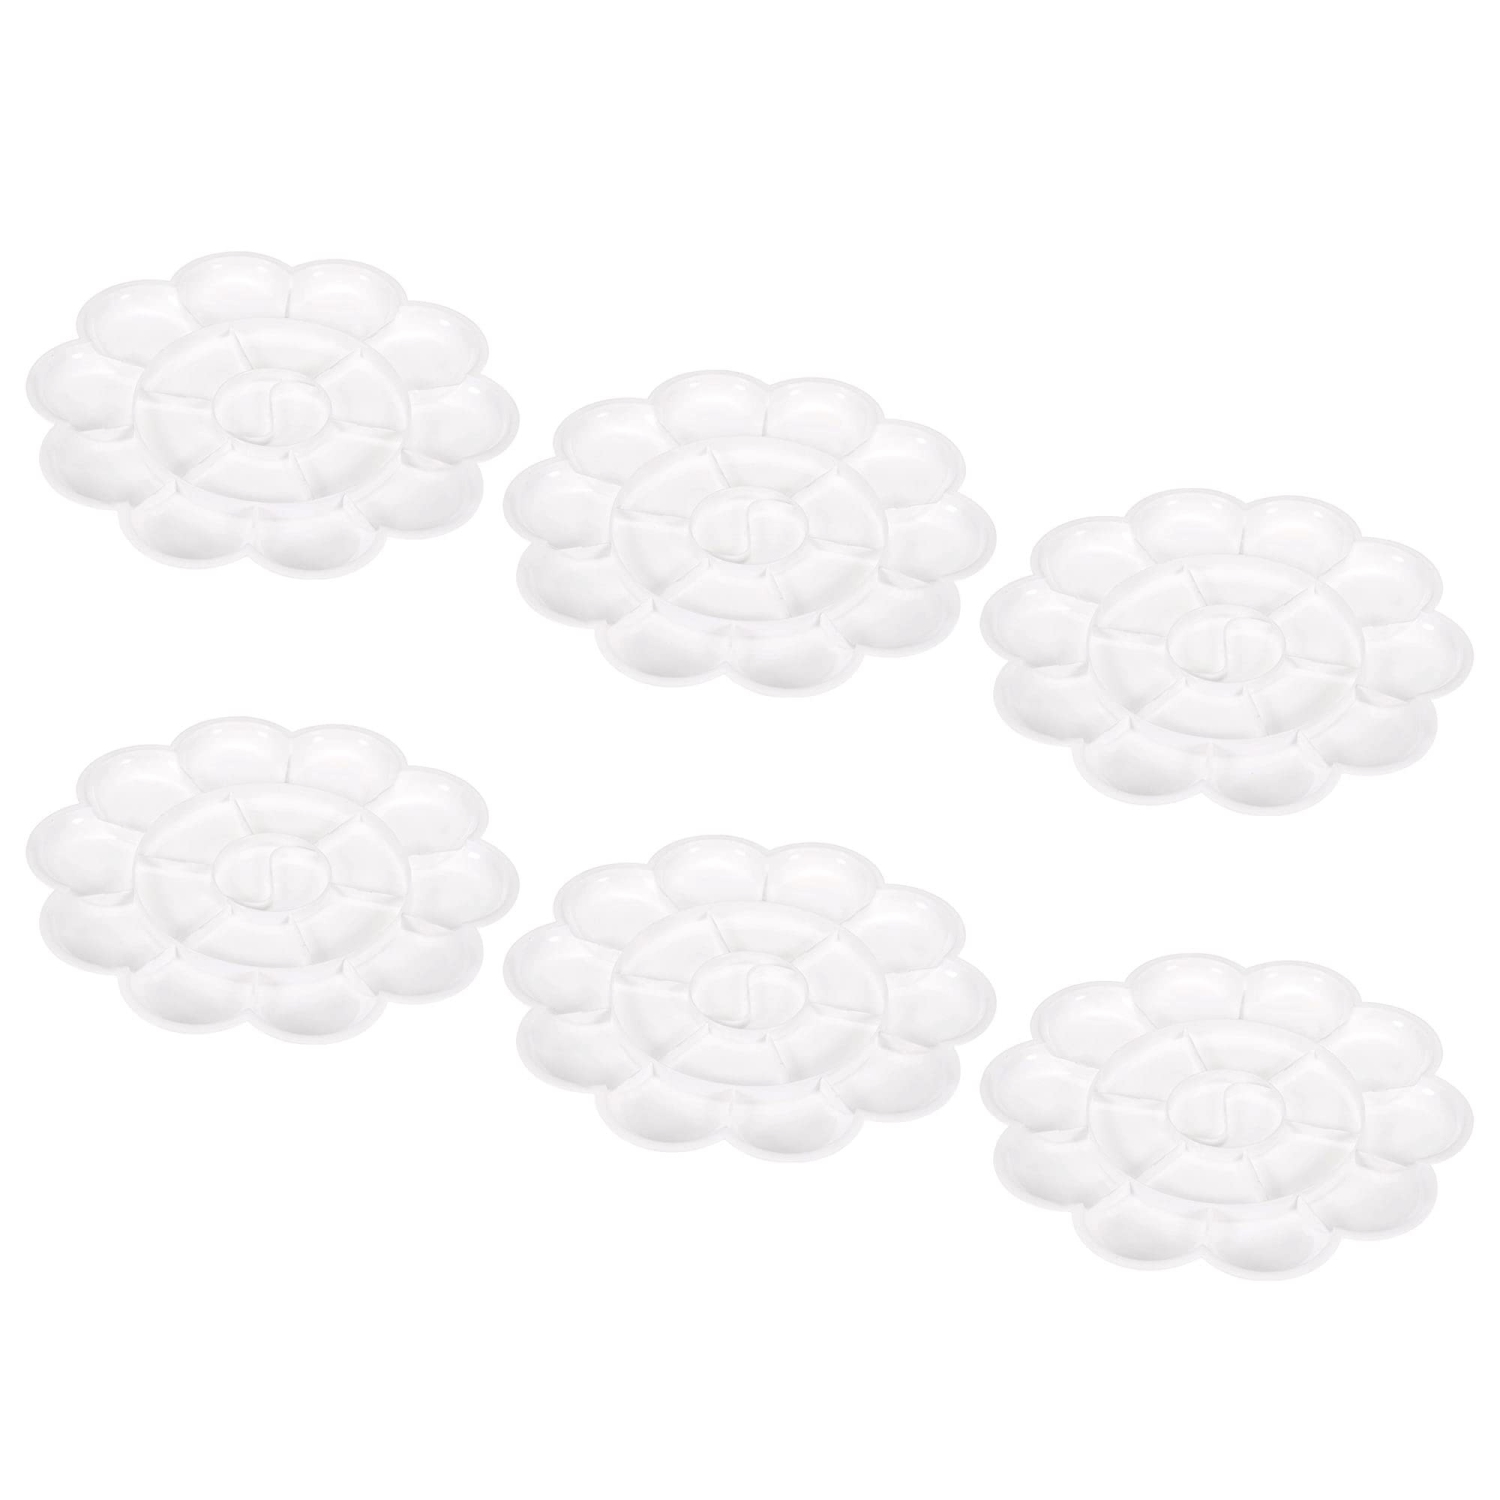 Flower Palette - 18 Wells Acrylic Paint Palette, 6 Pack Painting Pallet Holder for Art Supplies, White